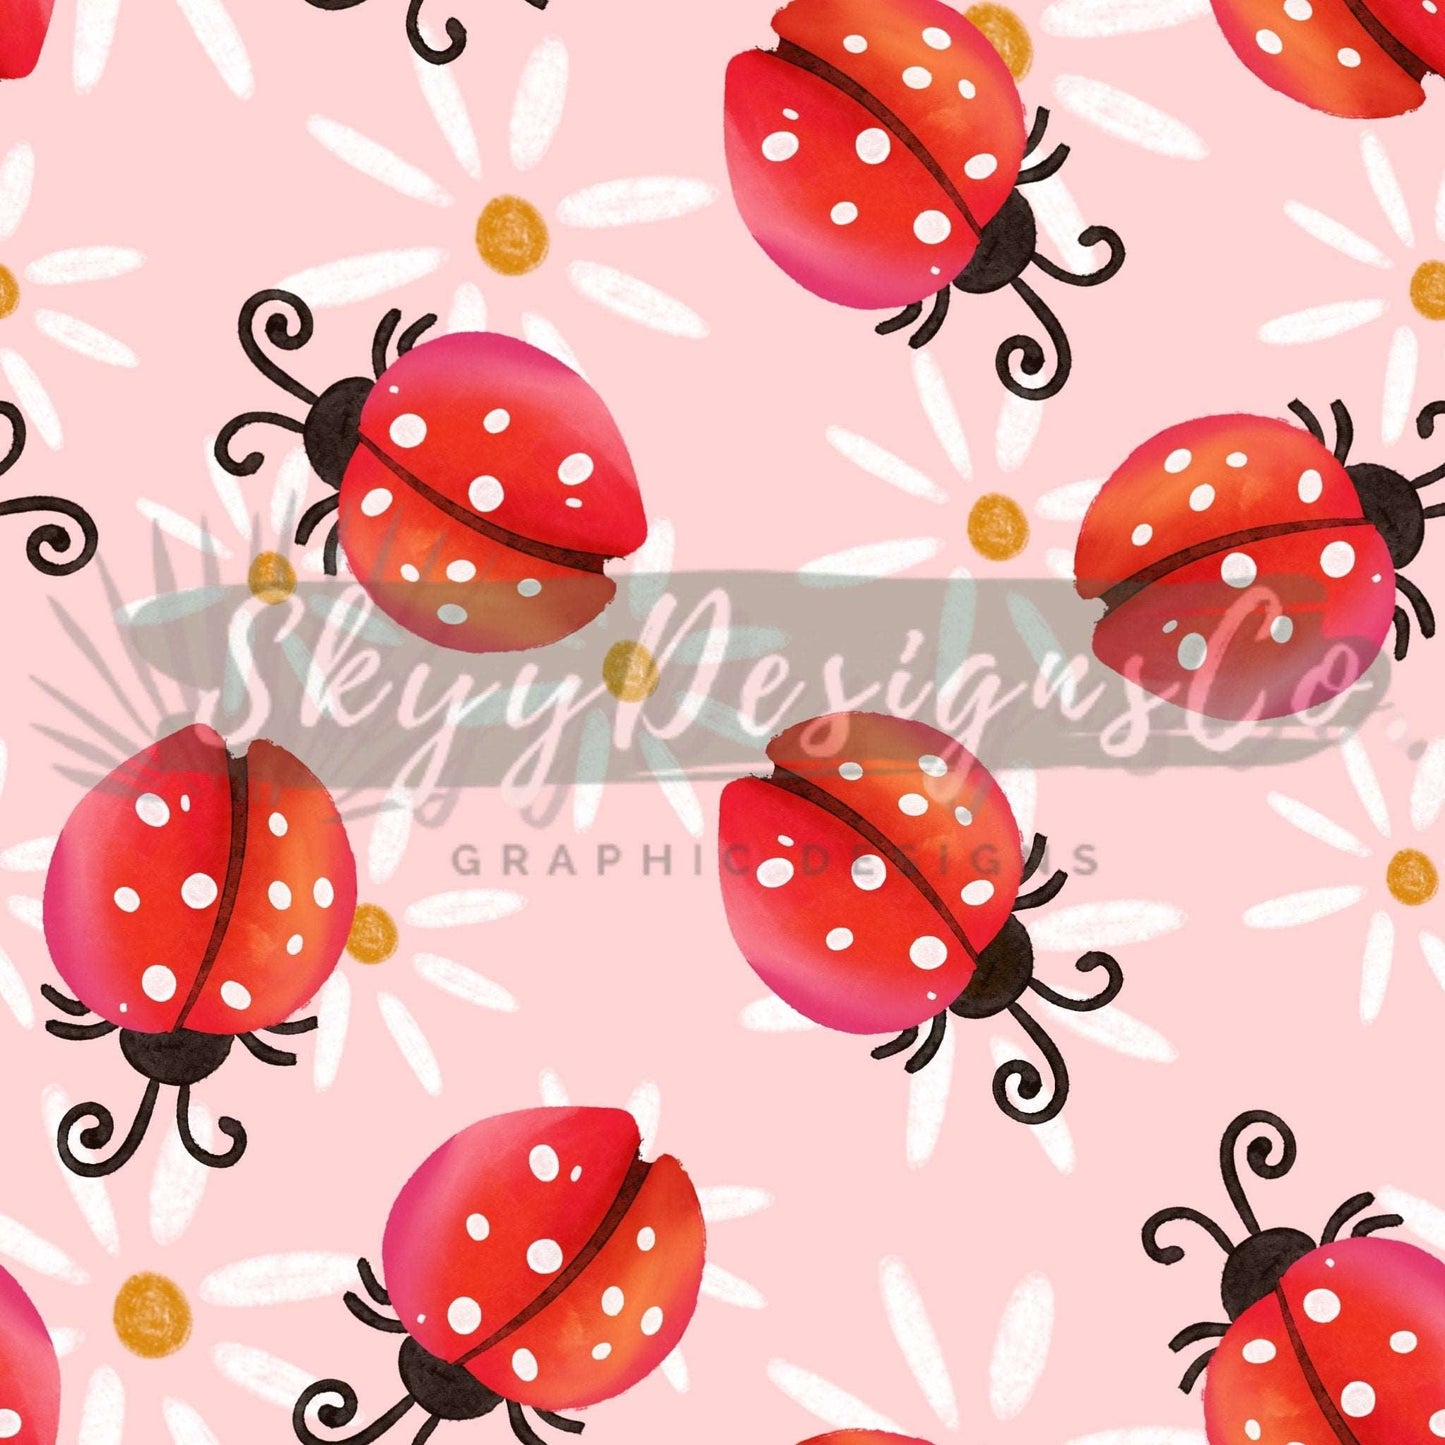 Lady bug floral daisy digital seamless pattern for fabrics and wallpapers, bugs seamless pattern, Digital paper floral ladybugs - SkyyDesignsCo